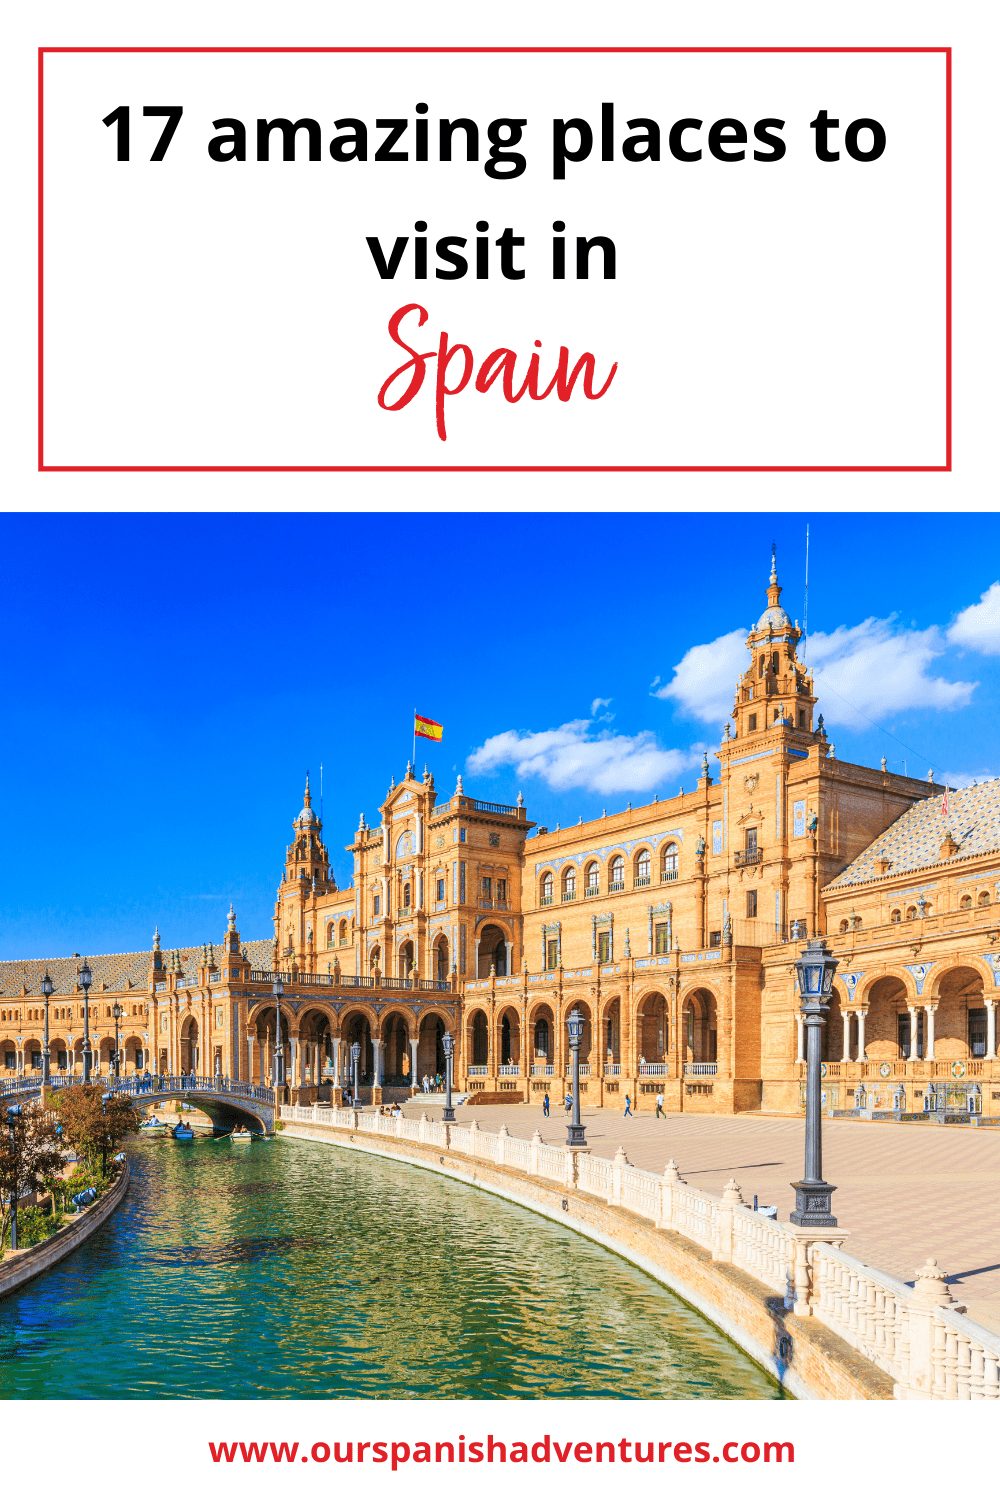 17 amazing places to visit in Spain | Our Spanish Adventures